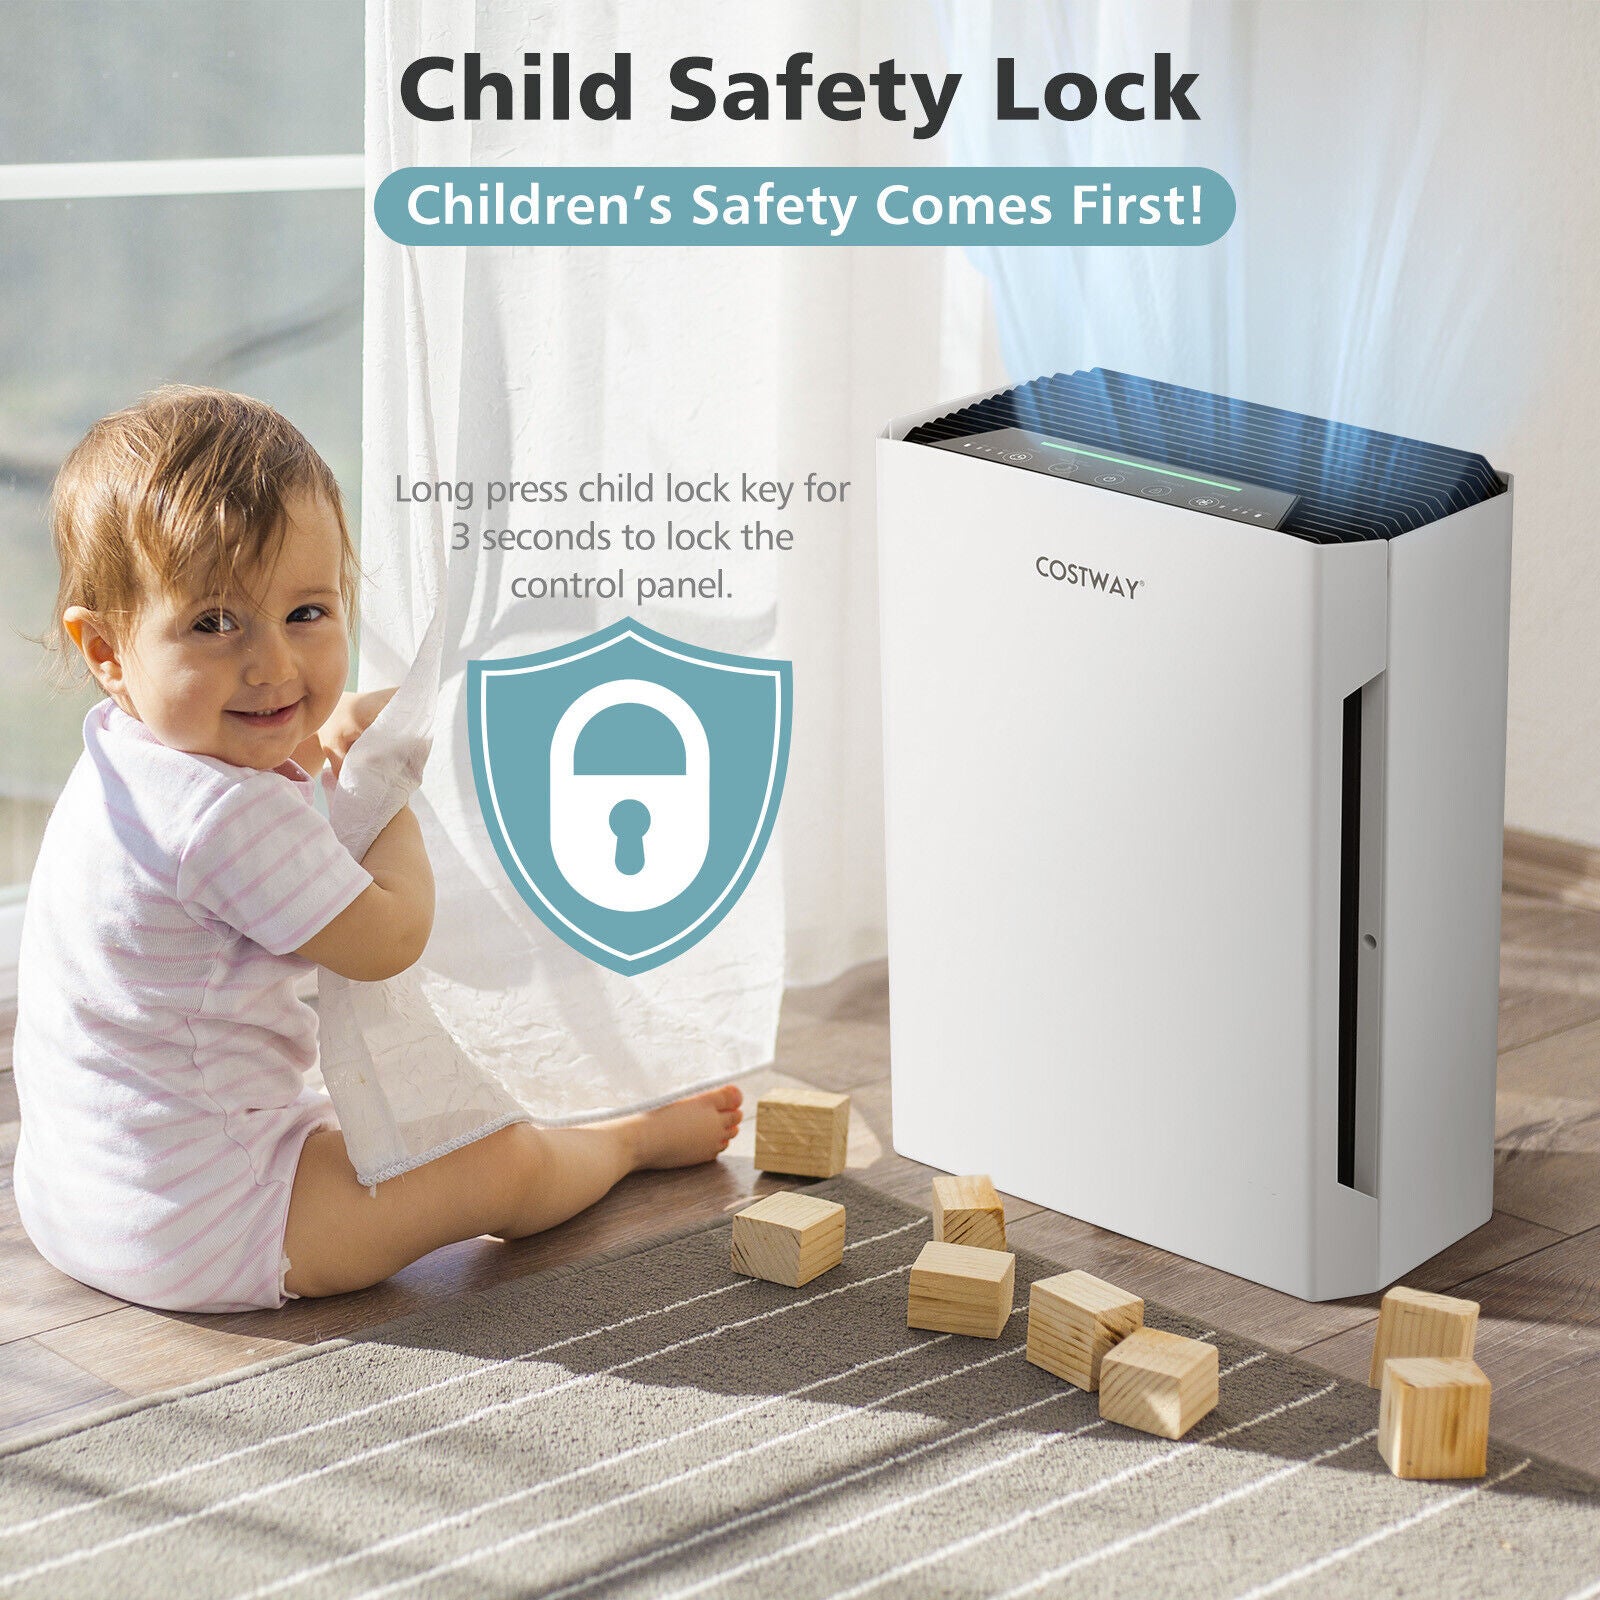 Child Safety Lock & Sleep Mode: Experience restful sleep with the powerful yet quiet operation of this air purifier. Sleep mode turns off the display and reduces fan speed for a restful sleep environment. Set the timer for 2, 4, 6, or 8 hours and the purifier will automatically turn off when you want it. The child safety lock function prevents children from playing with these settings. The quiet and energy-saving sleep mode allows you to enjoy a peaceful sleep in the fresh air.